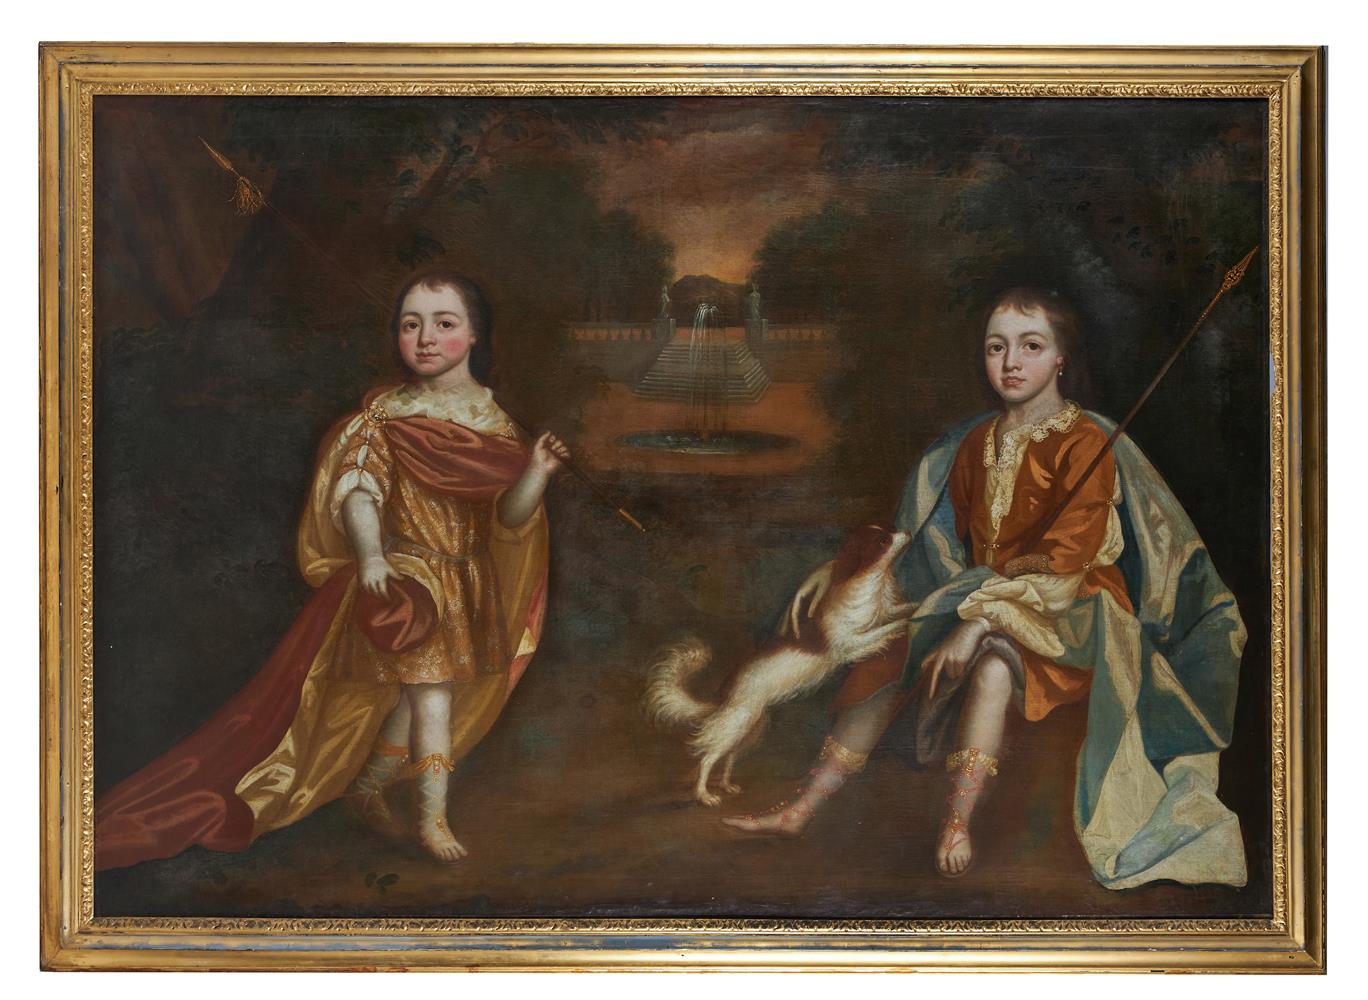 ENGLISH SCHOOL (CIRCA 1720), A DOUBLE PORTRAIT OF WILLIAM AND NATHANIEL LLOYD WITH THEIR DOG